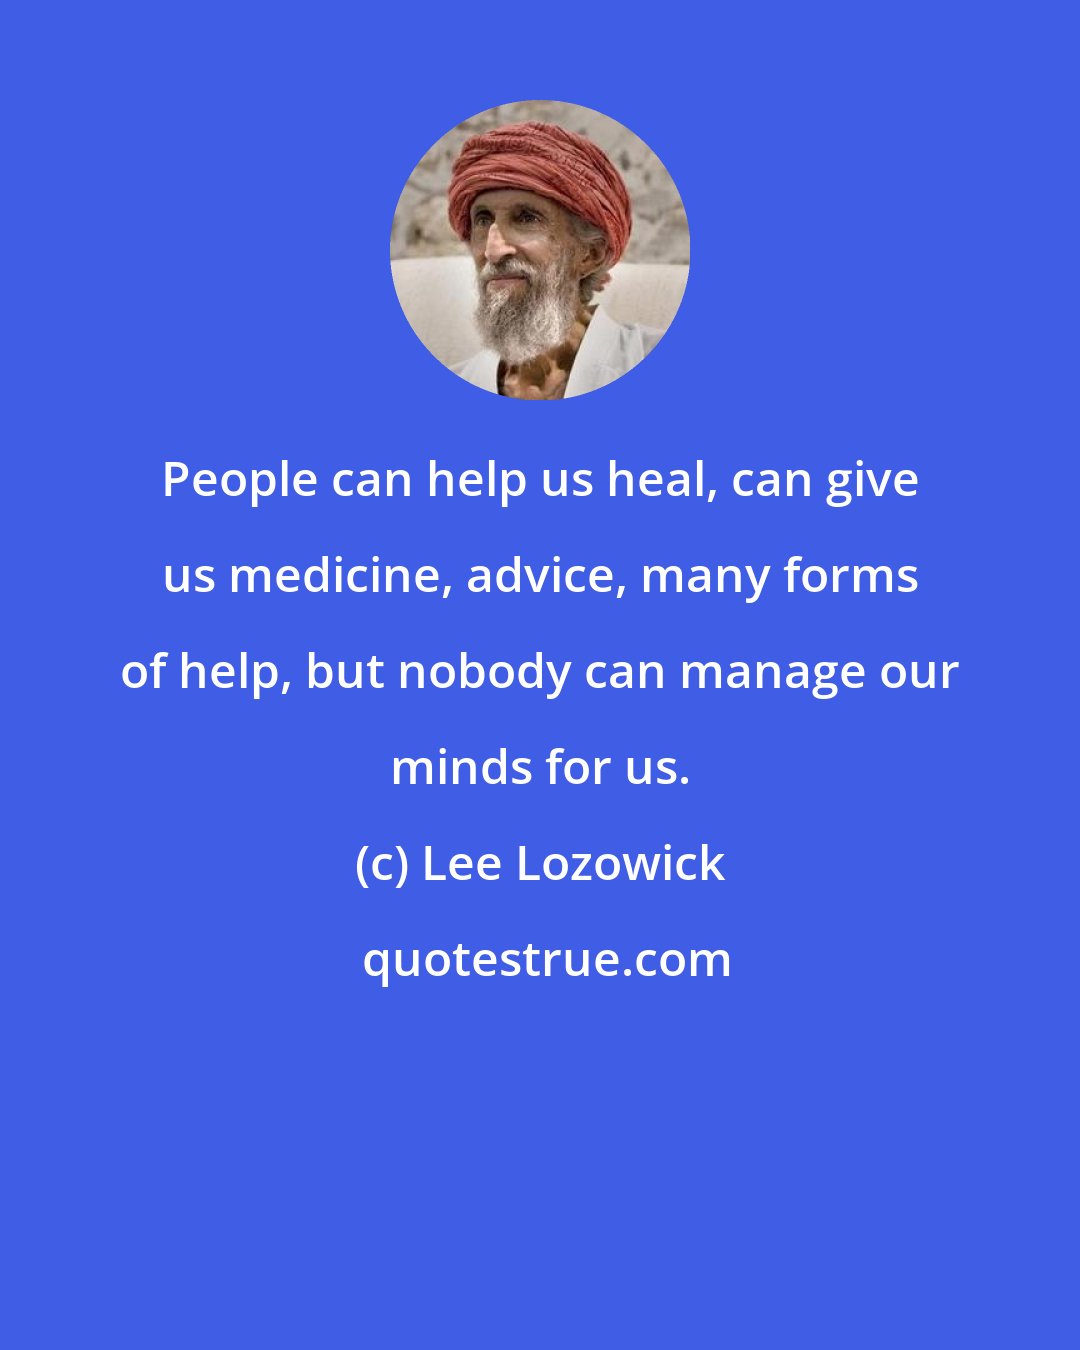 Lee Lozowick: People can help us heal, can give us medicine, advice, many forms of help, but nobody can manage our minds for us.